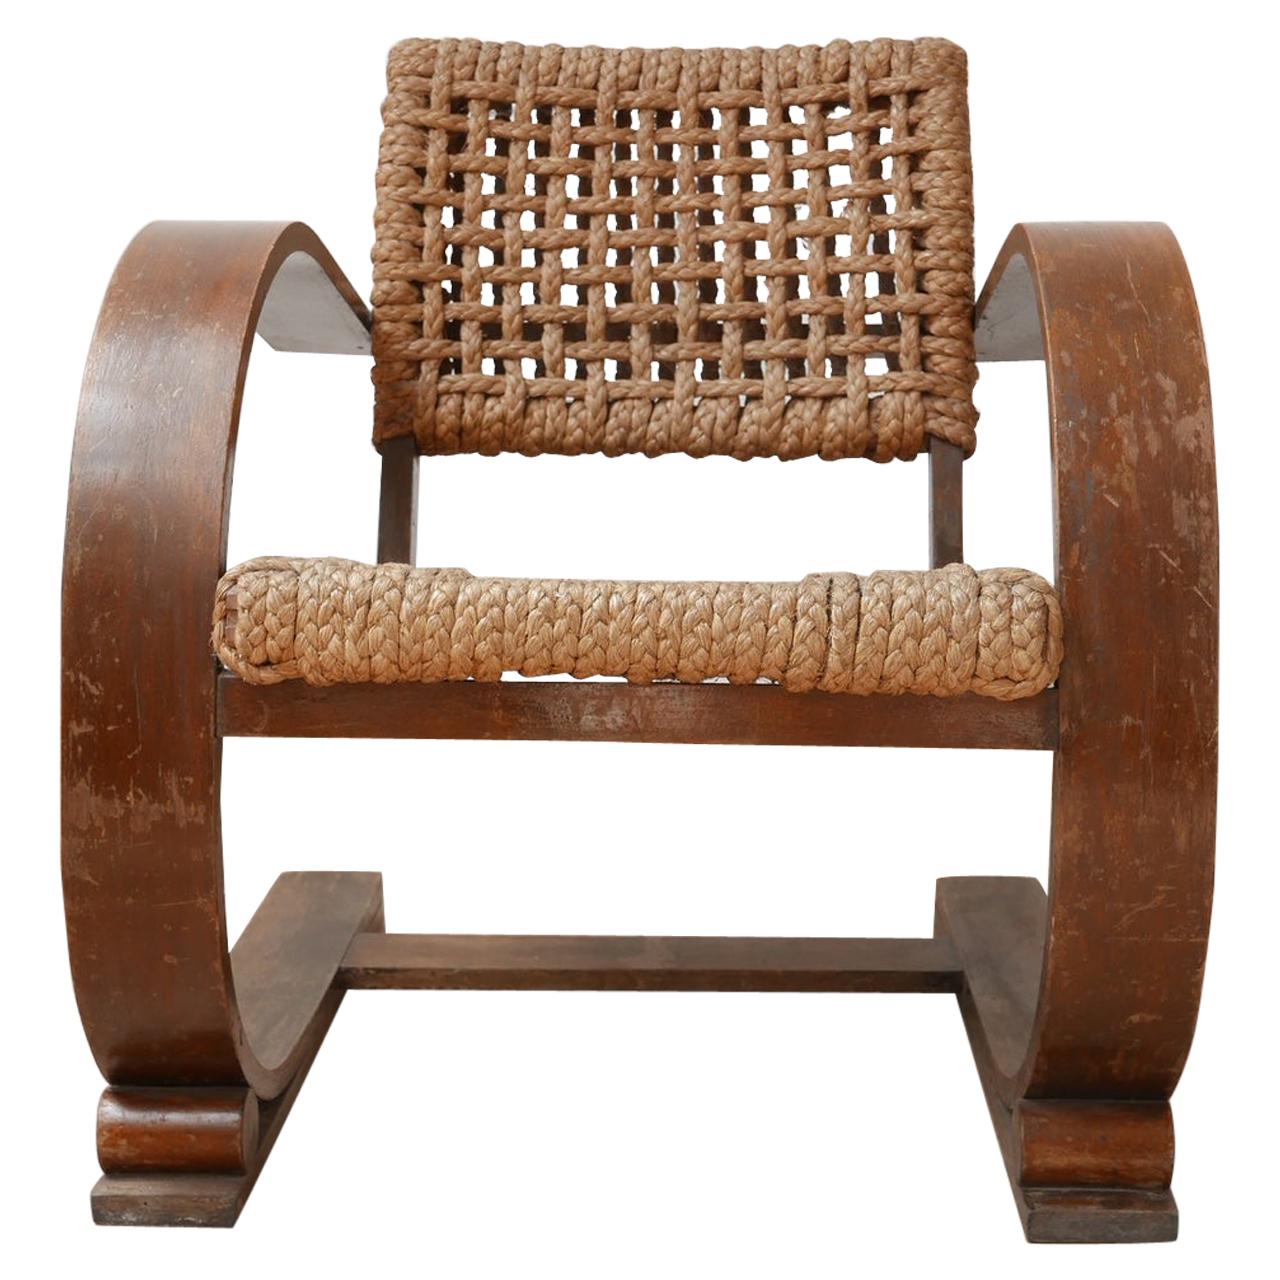 Audoux-Minet Rope Mid-Century French Bentwood Armchair